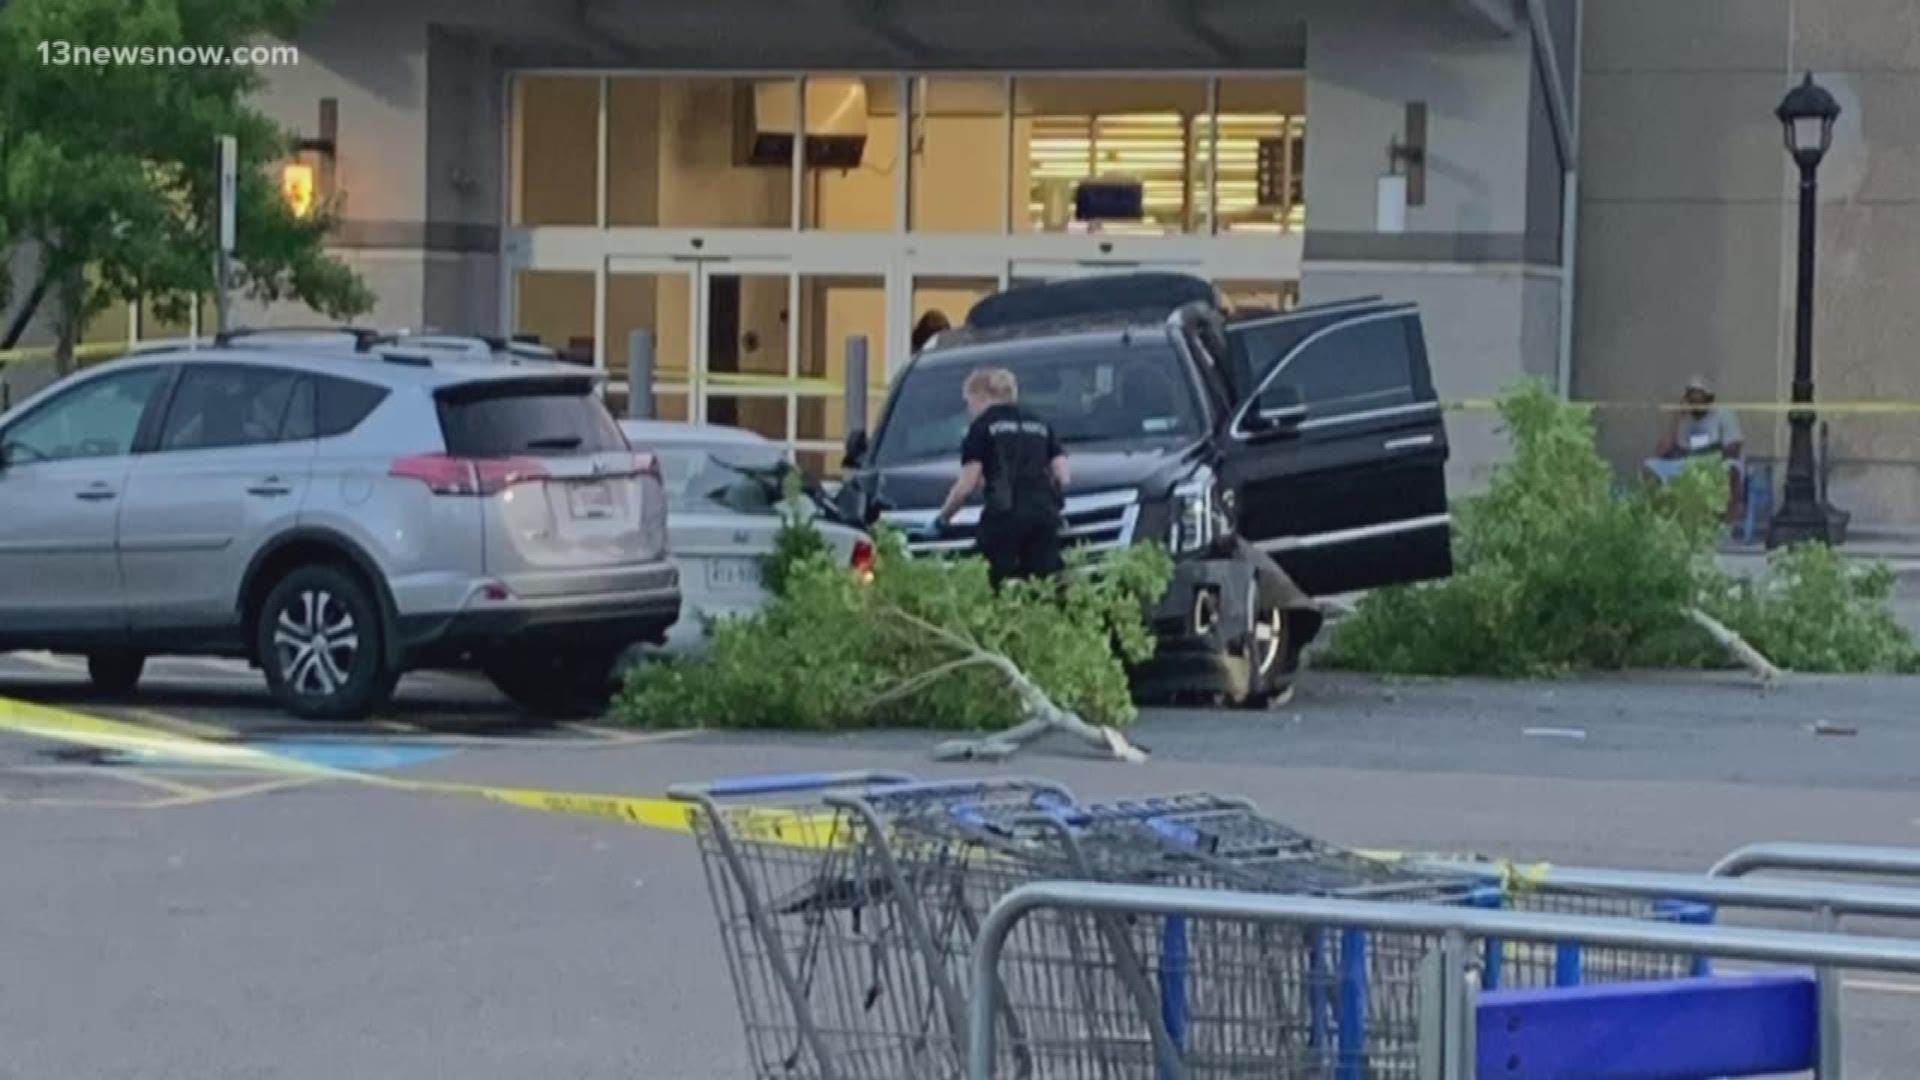 Chesapeake police confirmed they worked on an operation with the DEA Tuesday night and that an officer-involved shooting happened in the parking lot of the Lynnhaven Walmart. Police are still looking for a suspect.